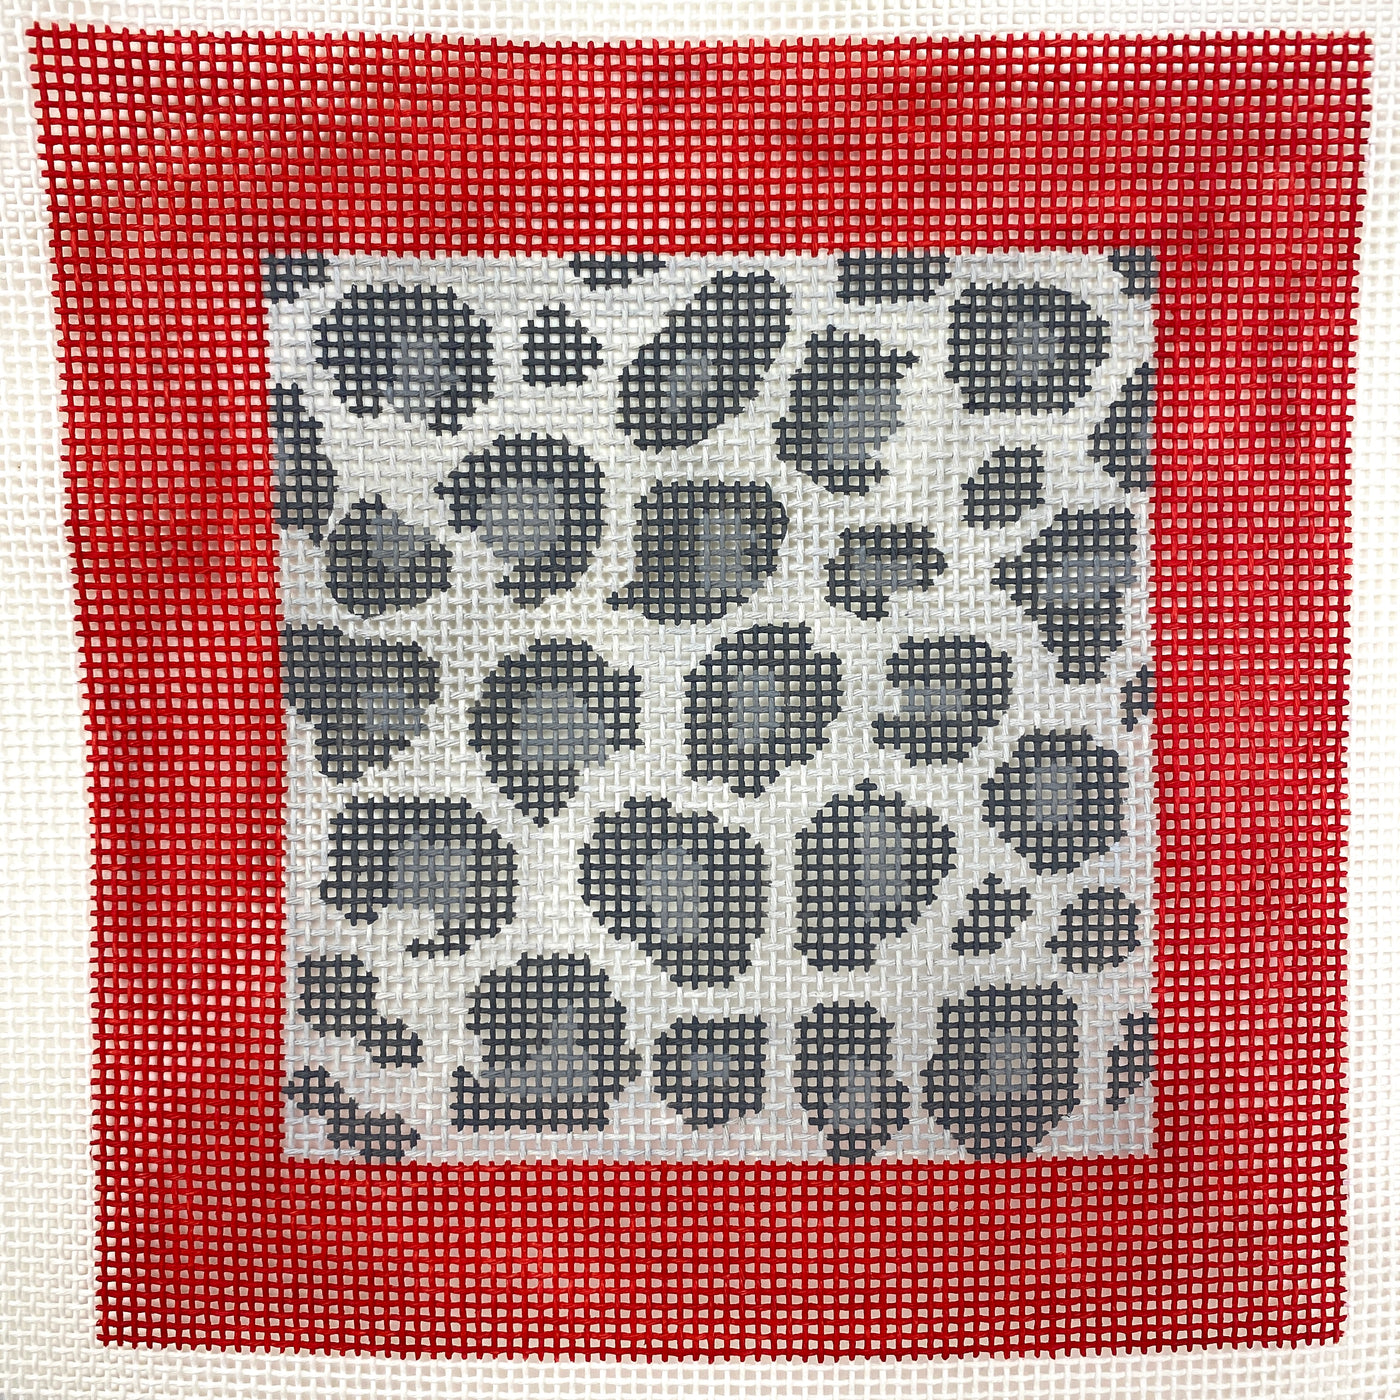 Snow Leopard with Red Border Kit (includes fiber)